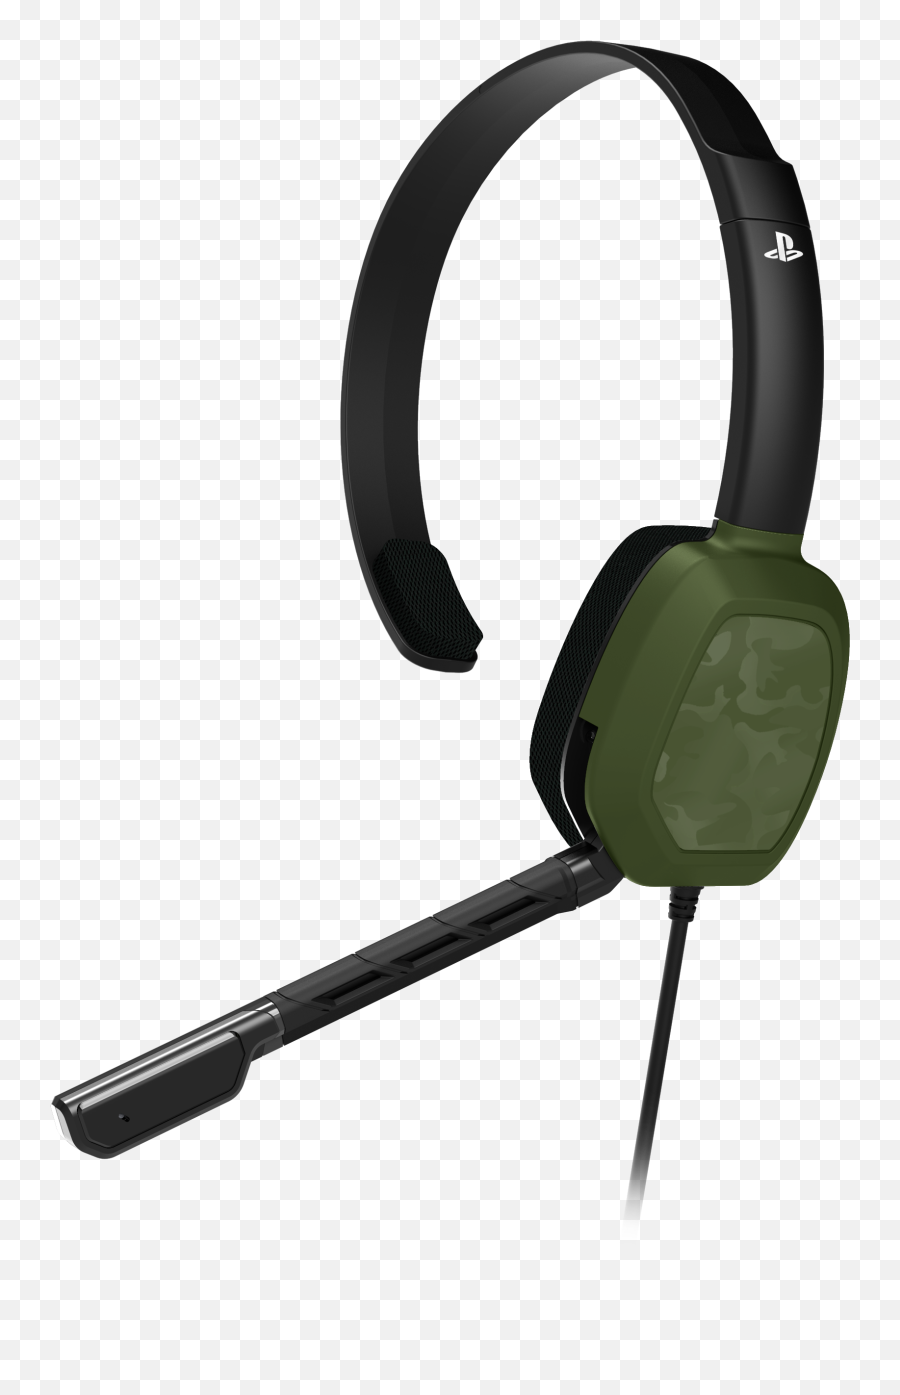 Lvl 1 Green Camo Wired Chat Gaming Headset For Playstation 4 Playstation 4 Gamestop - White Xbox Headset Emoji,Logo Games Answers Level 1